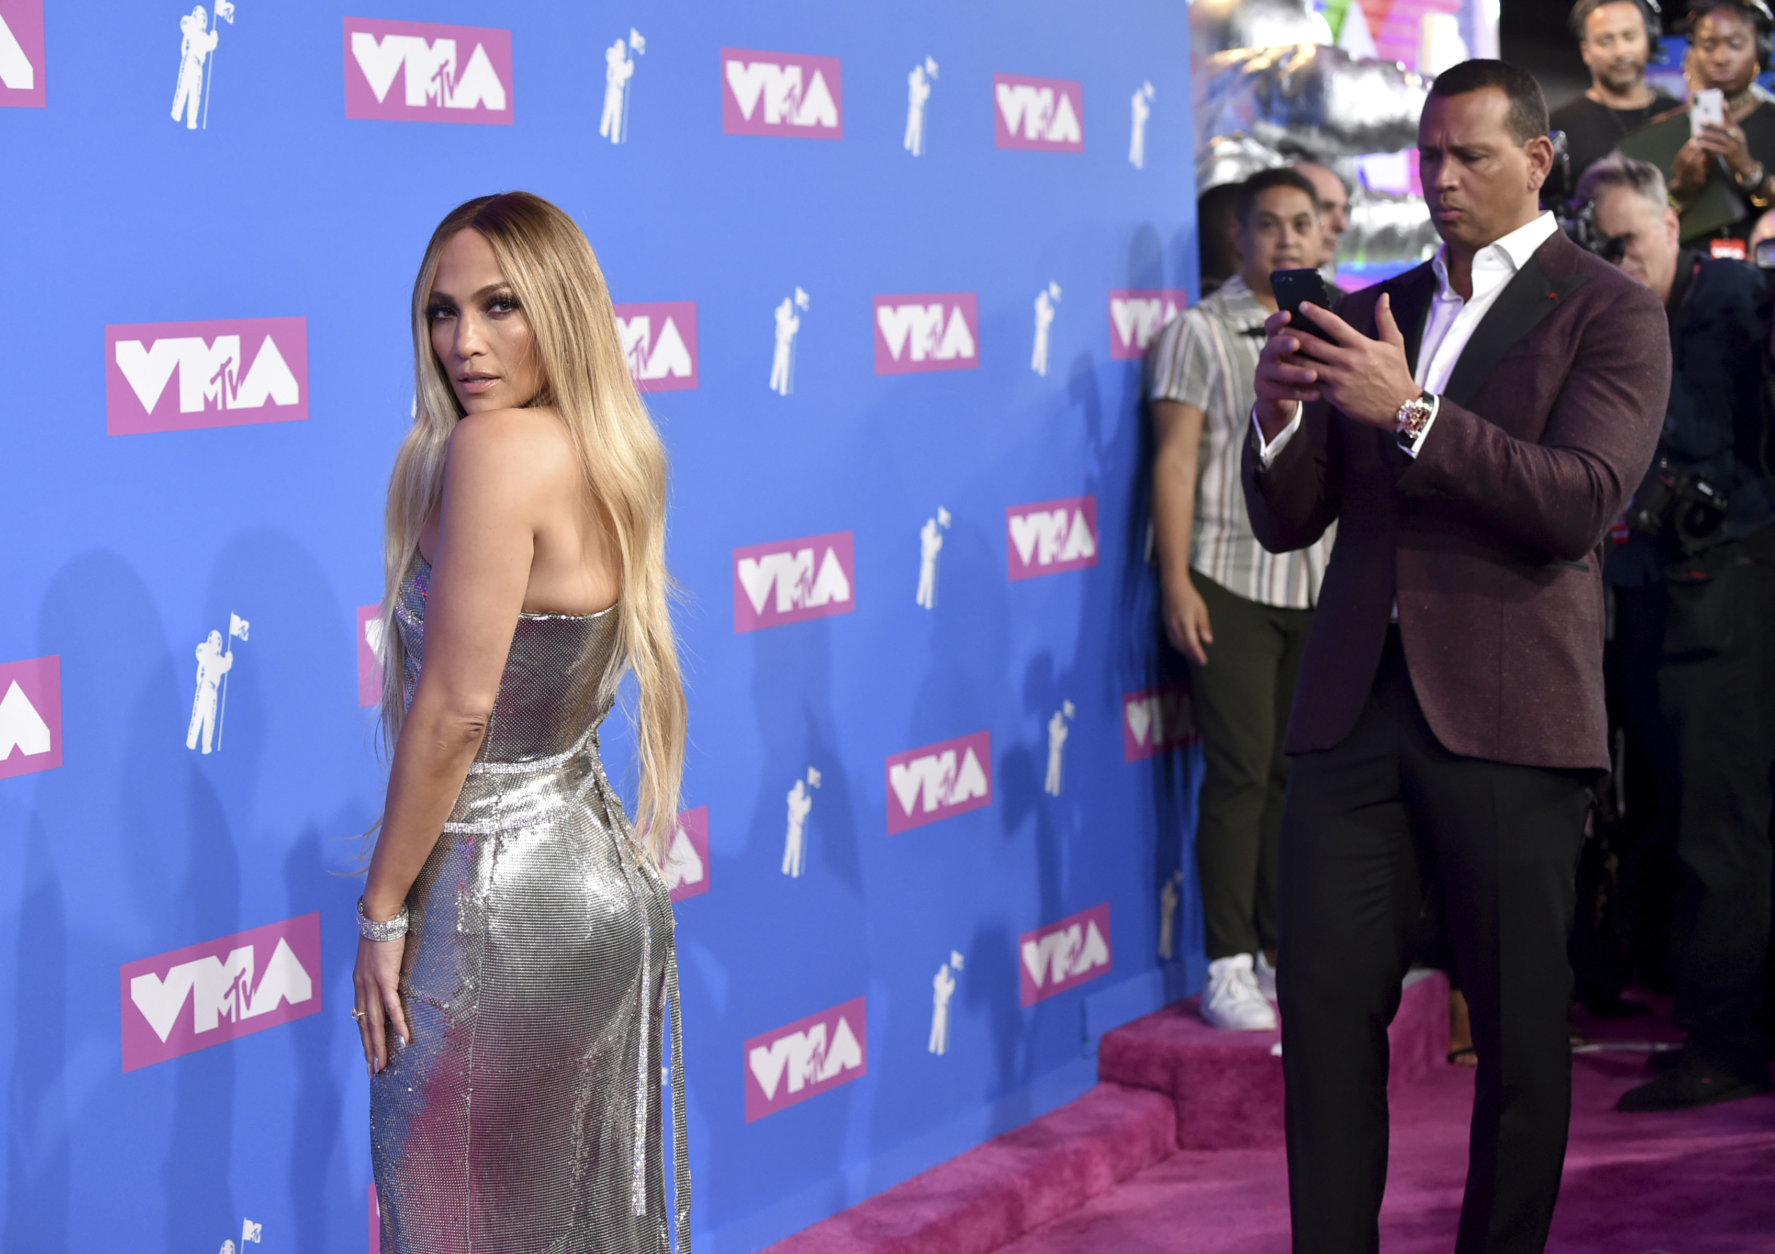 Alex Rodriguez, right, photographs Jennifer Lopez as they arrive at the MTV Video Music Awards at Radio City Music Hall on Monday, Aug. 20, 2018, in New York. (Photo by Evan Agostini/Invision/AP)